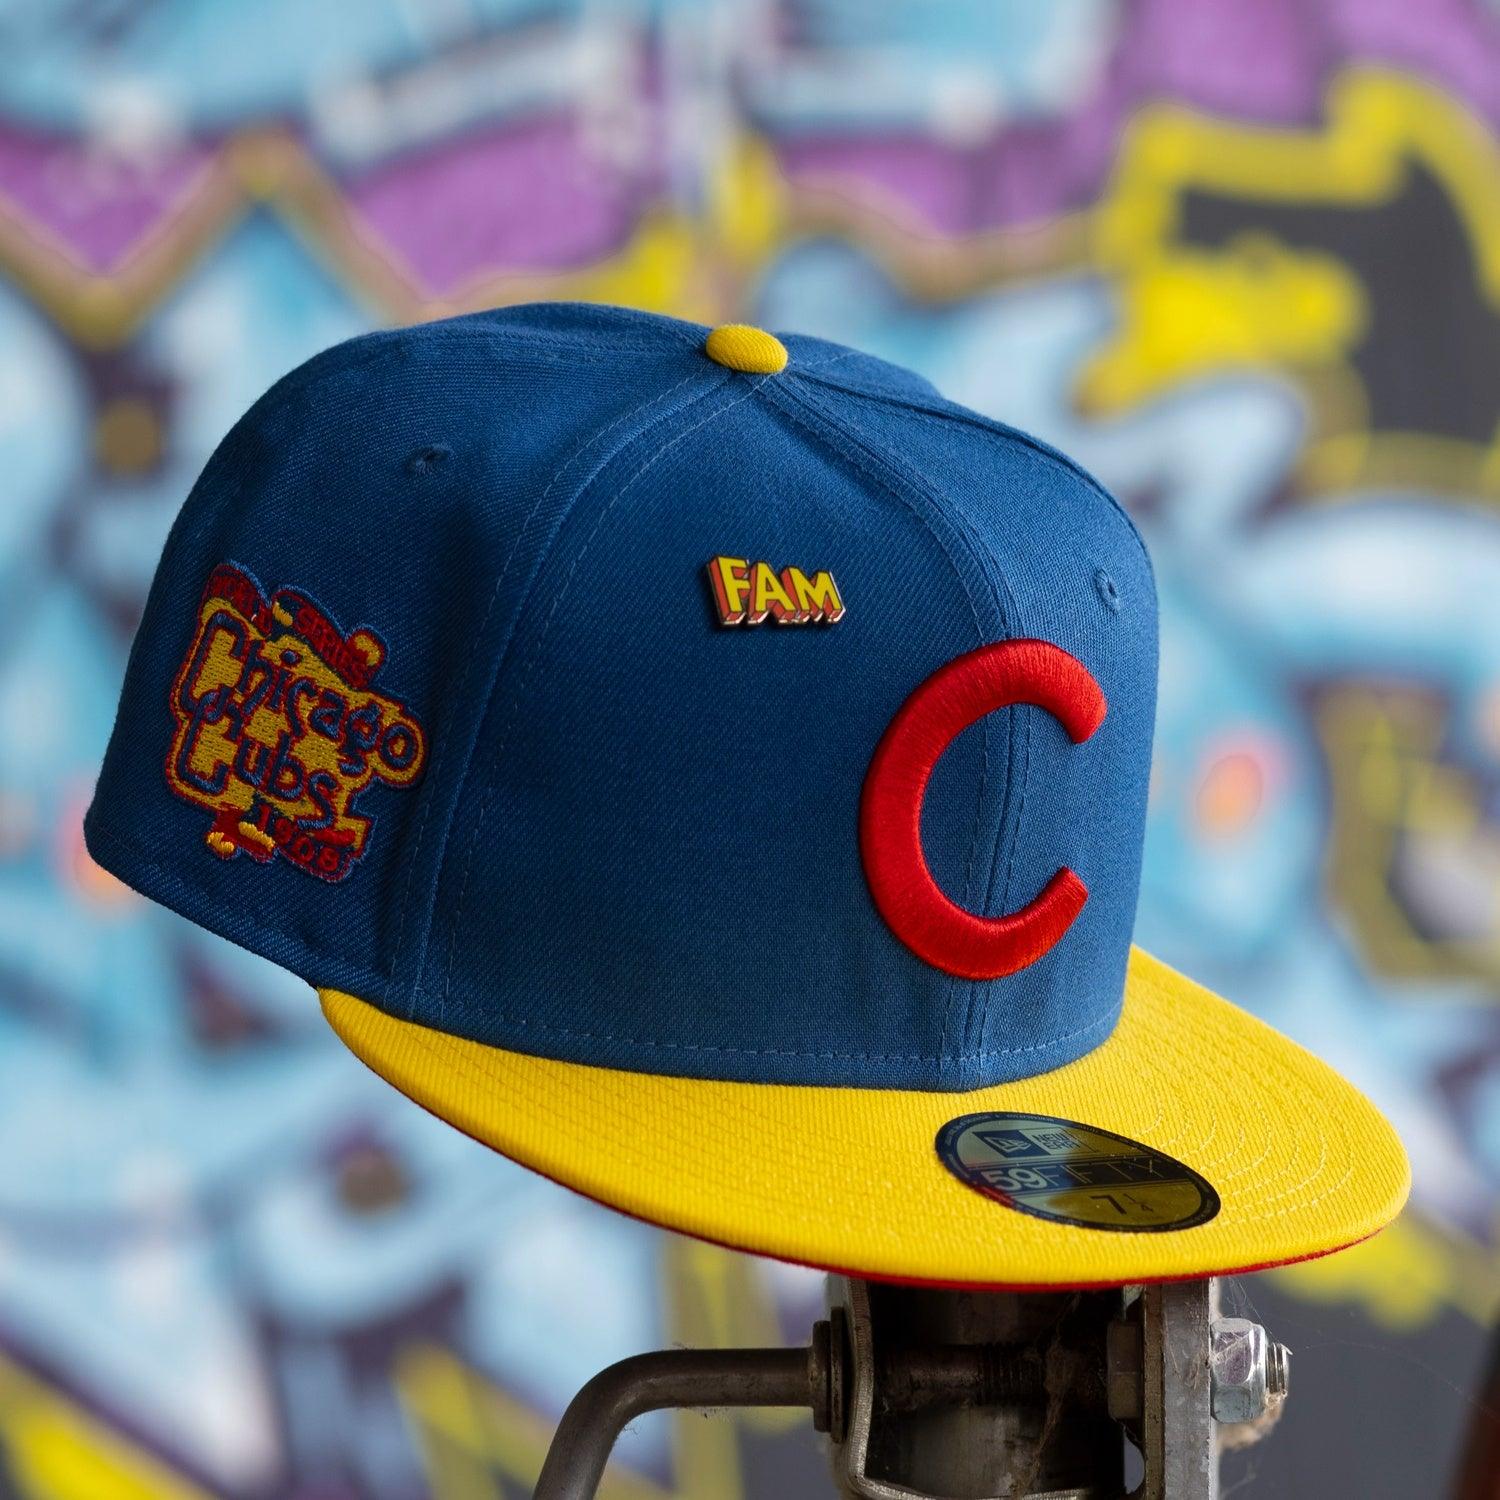 New Era Chicago Cubs Black and Red Edition 59Fifty Fitted Cap